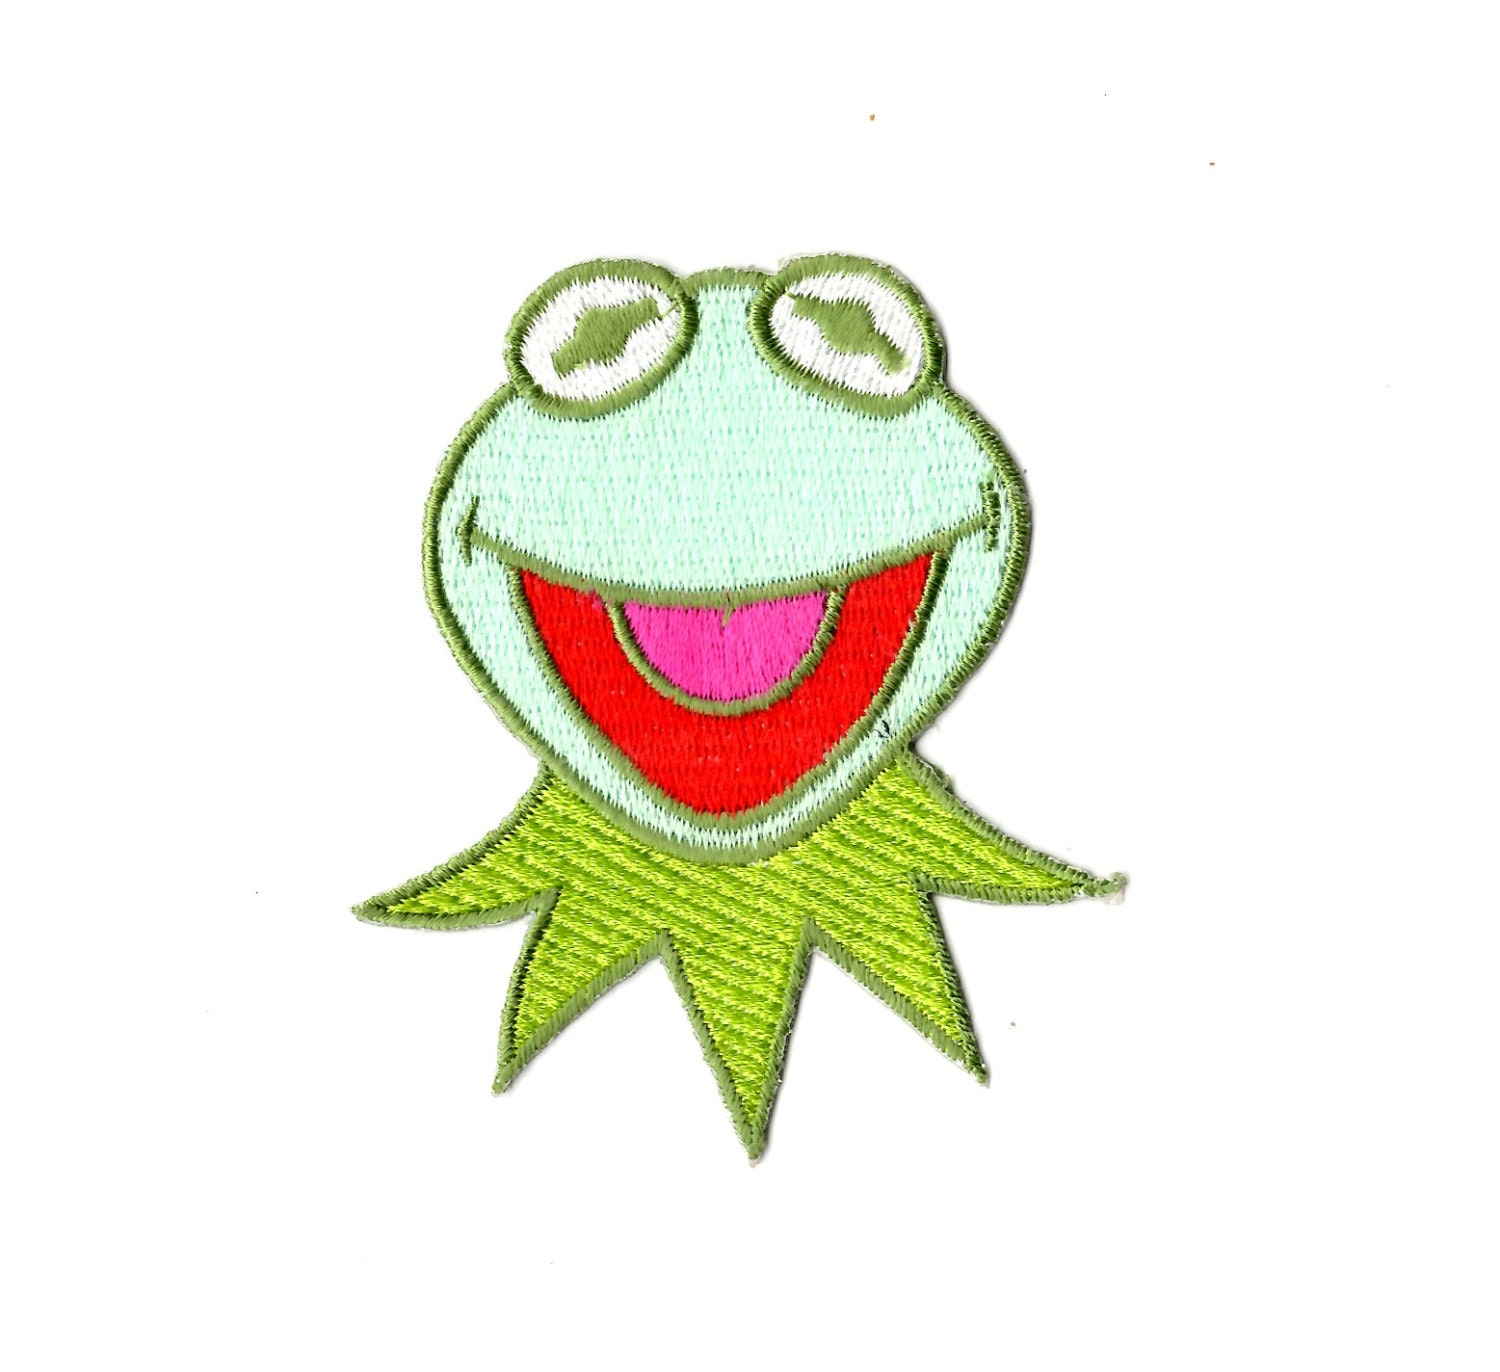 Download Kermit the Frog embroidered iron on patch